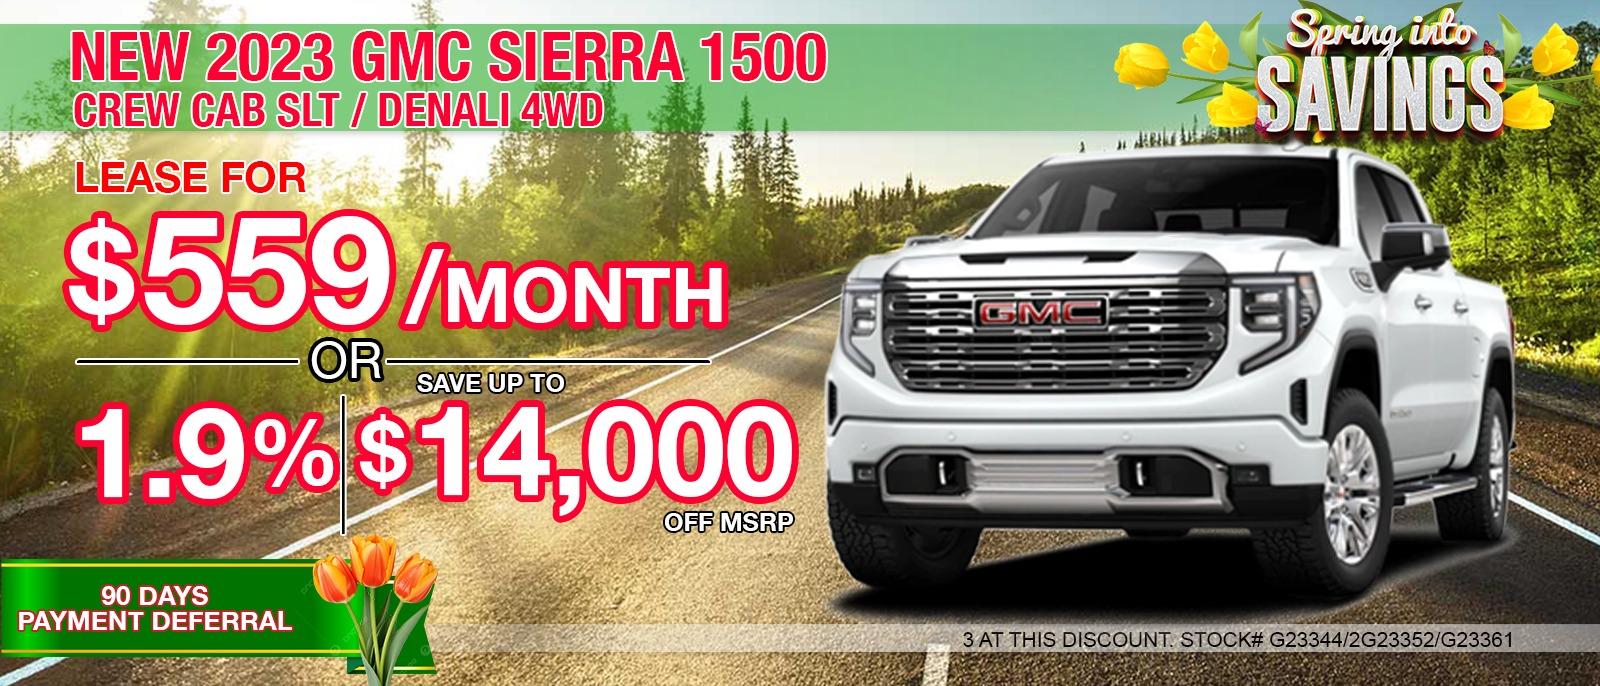 2023 GMC SIERRA 1500 CREW CAB DENALI / SLT / SLE. Your Net Savings After All Offers save up to $14,000